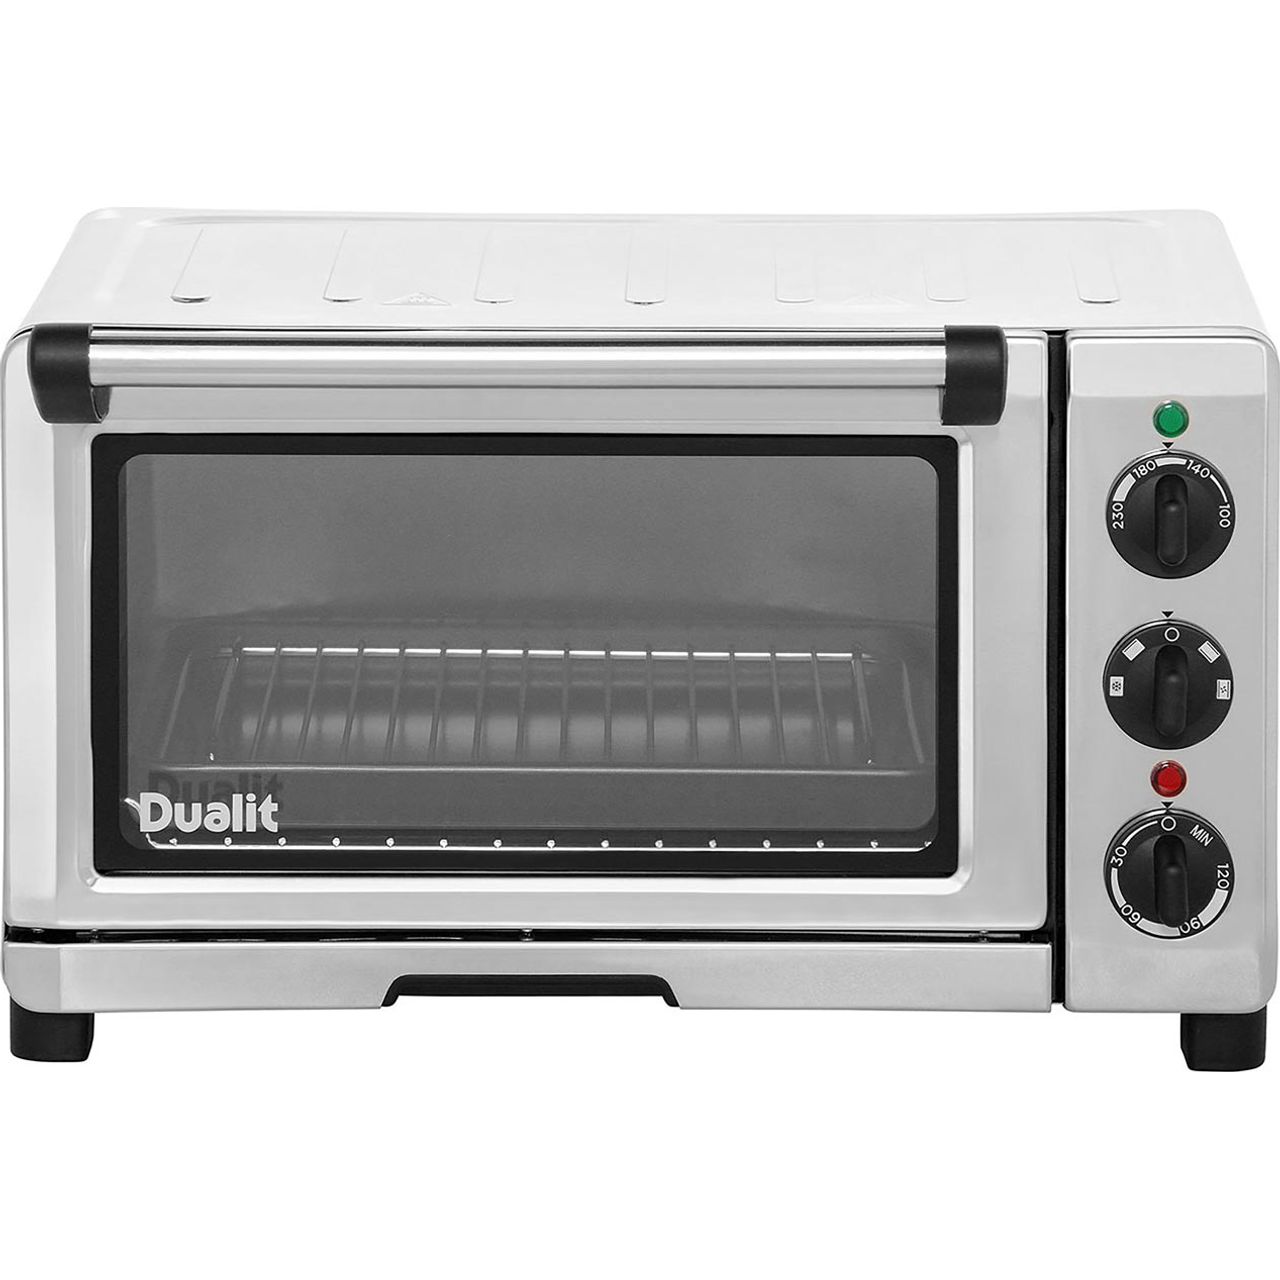 Dualit 89200 Mini Oven Review